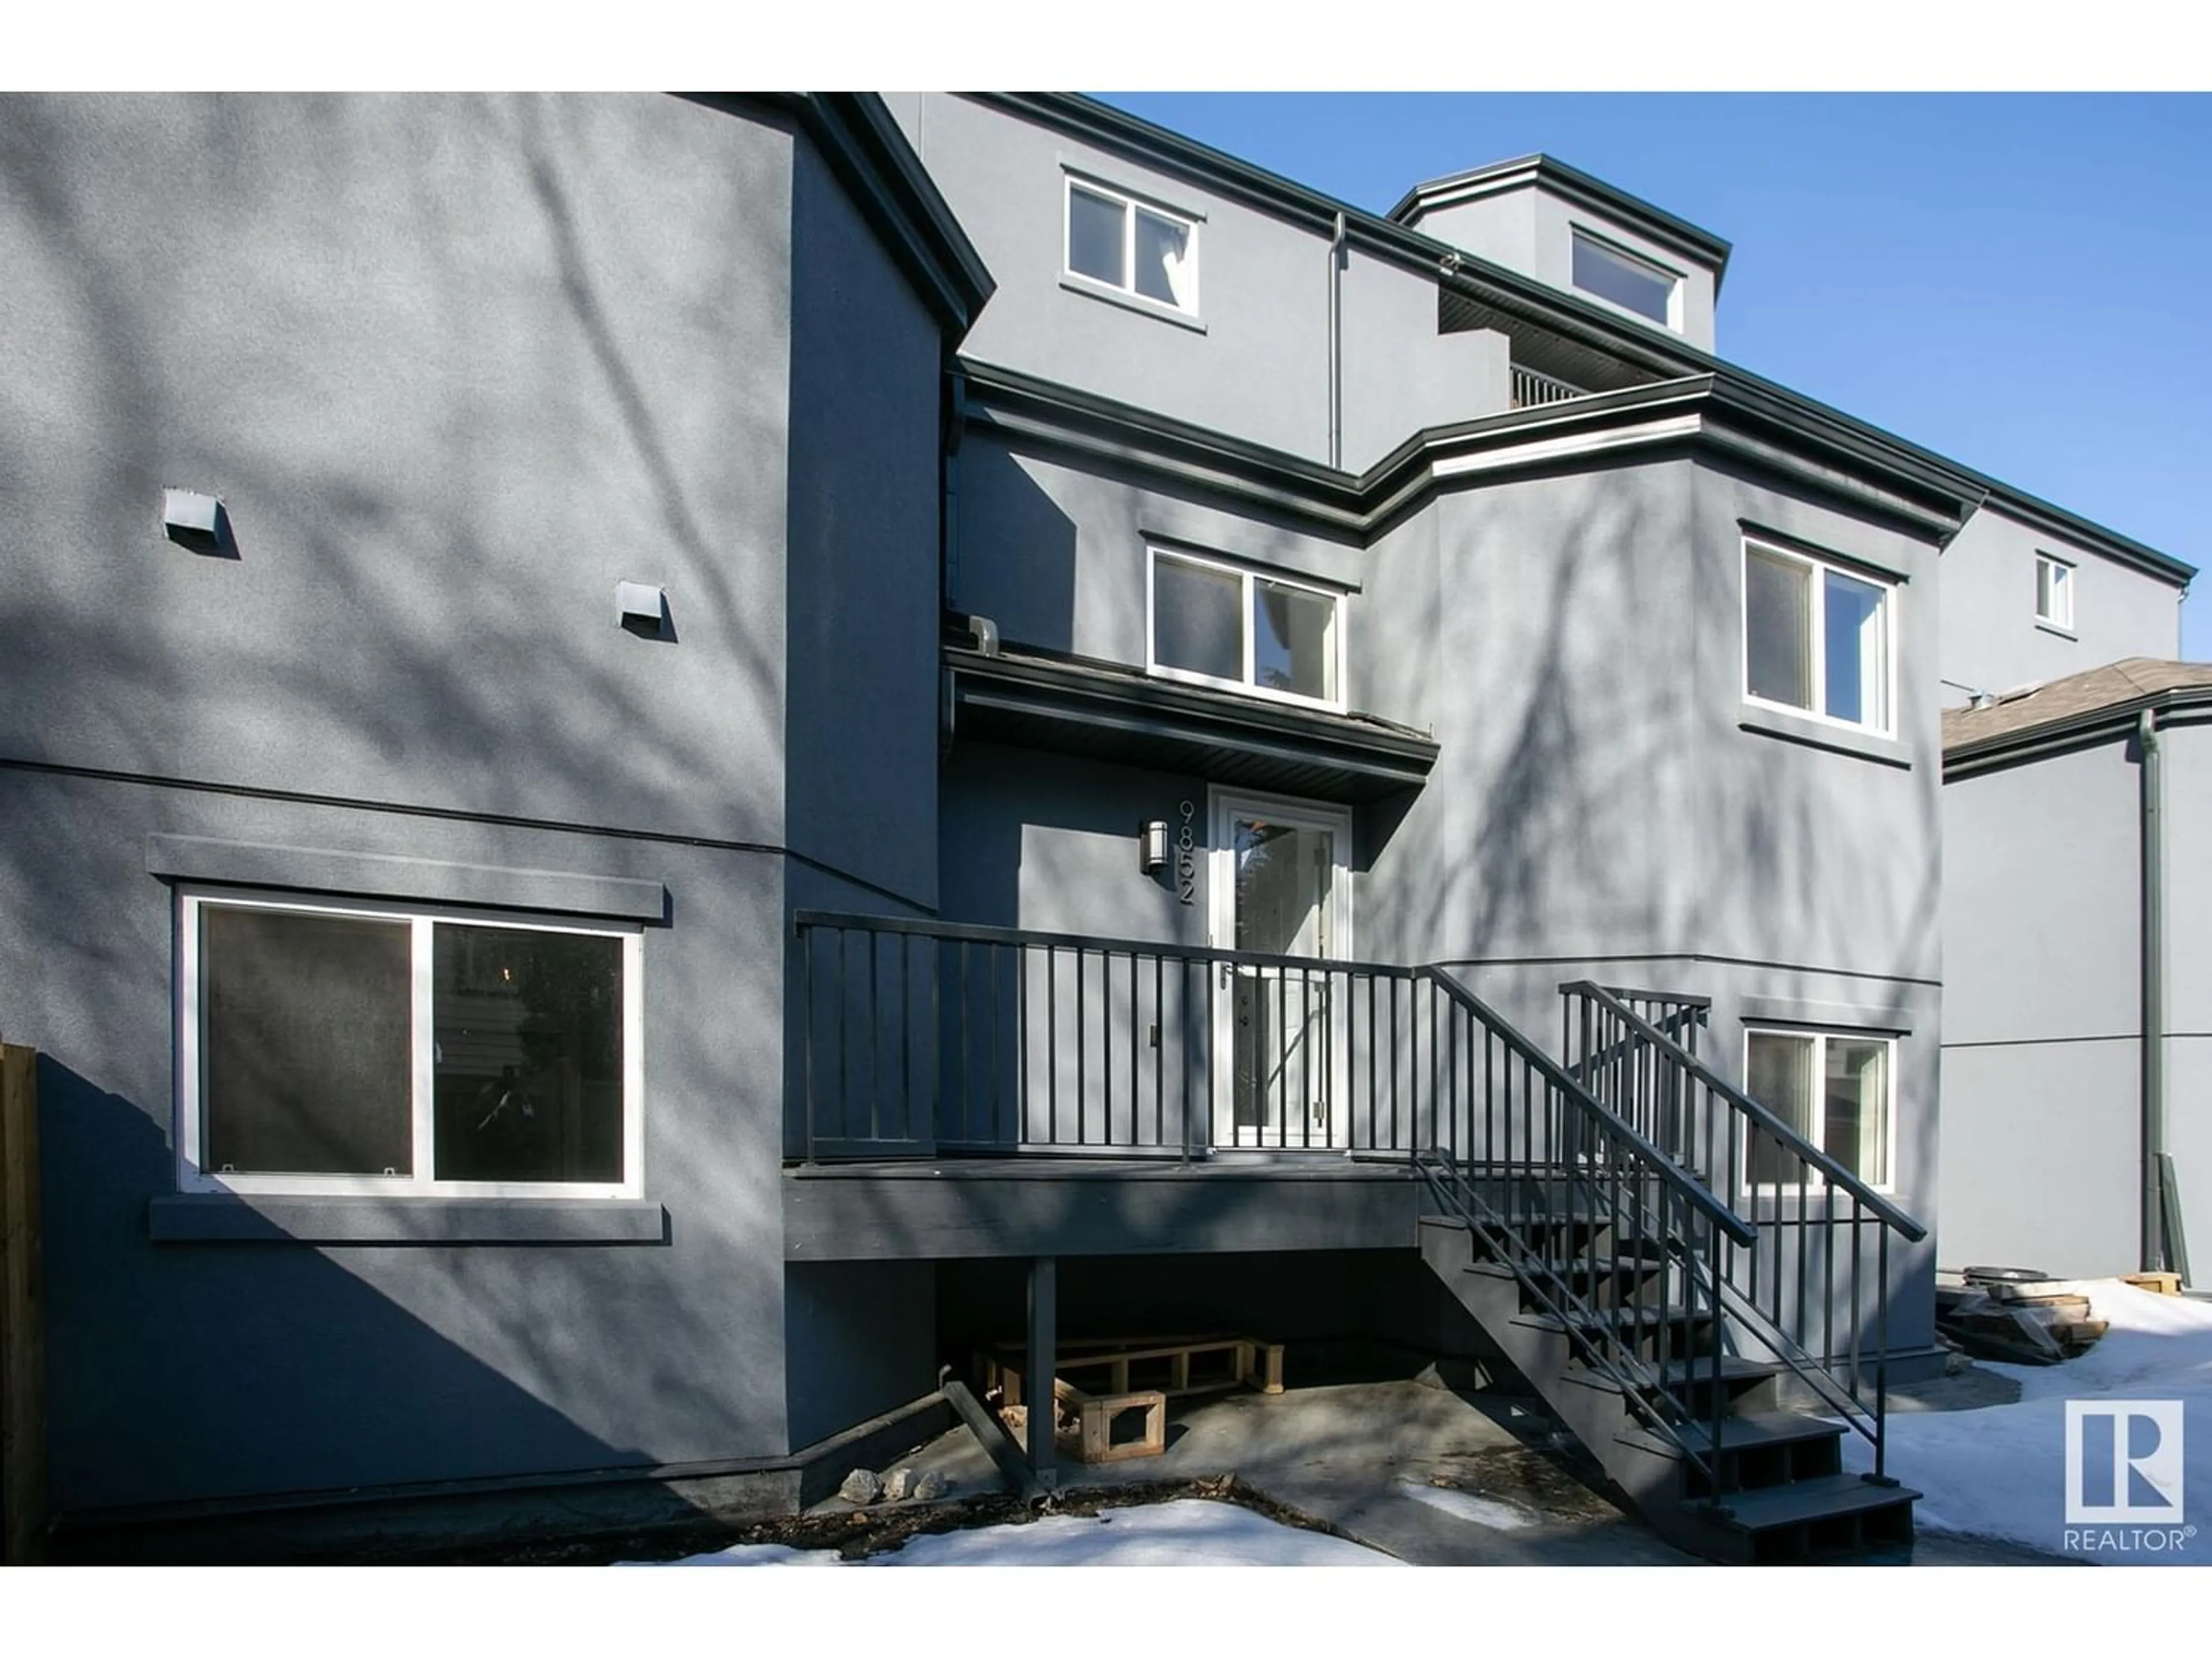 A pic from exterior of the house or condo for #106 9854 88 AV NW, Edmonton Alberta T6E2R3